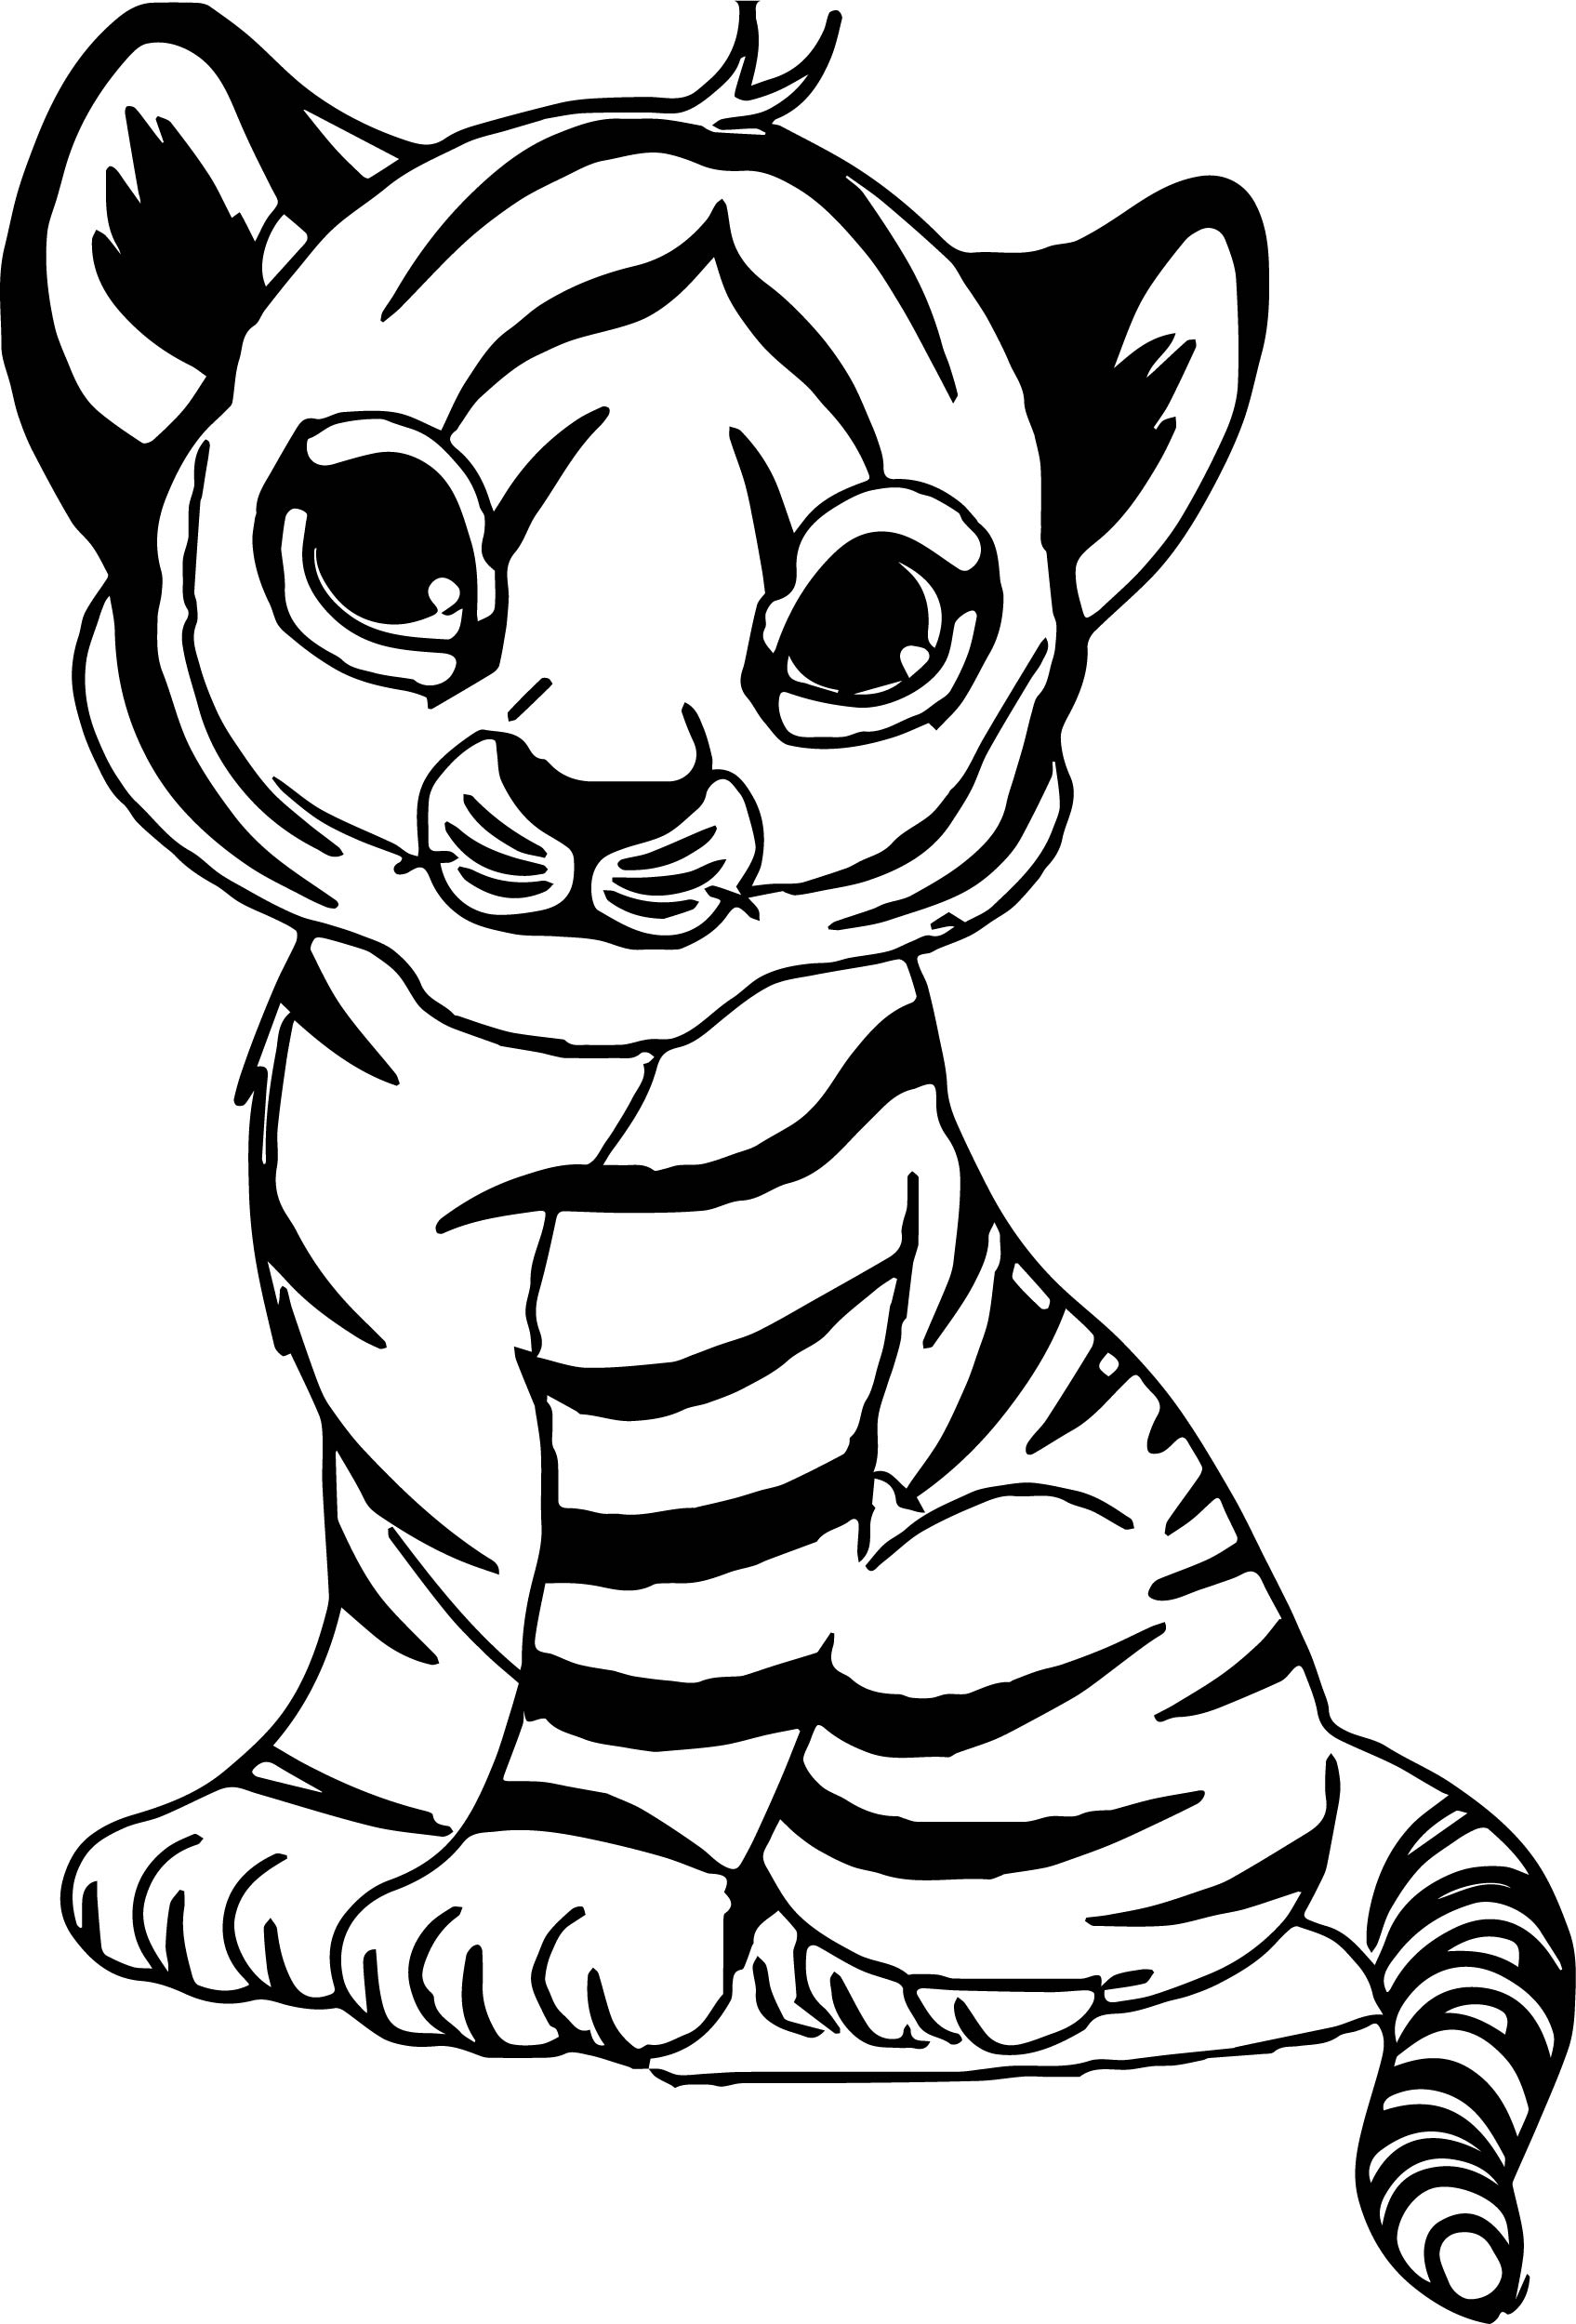 the-cutest-baby-tiger-coloring-page-free-printable-coloring-pages-for